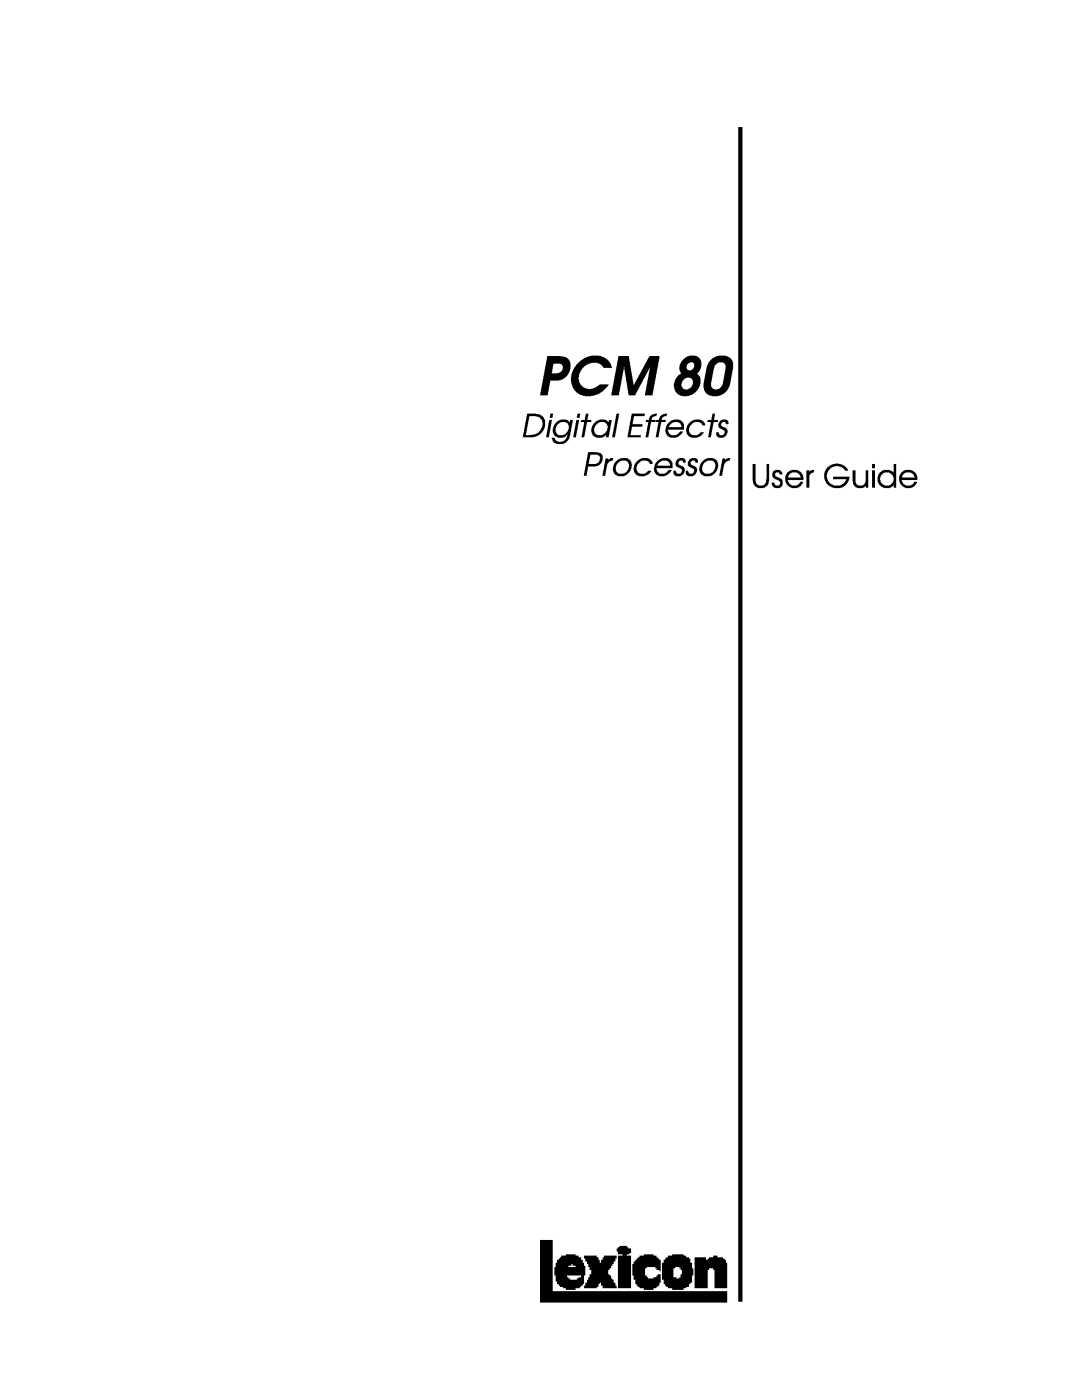 Lexicon PCM 80 manual Digital Effects Processor, User Guide 